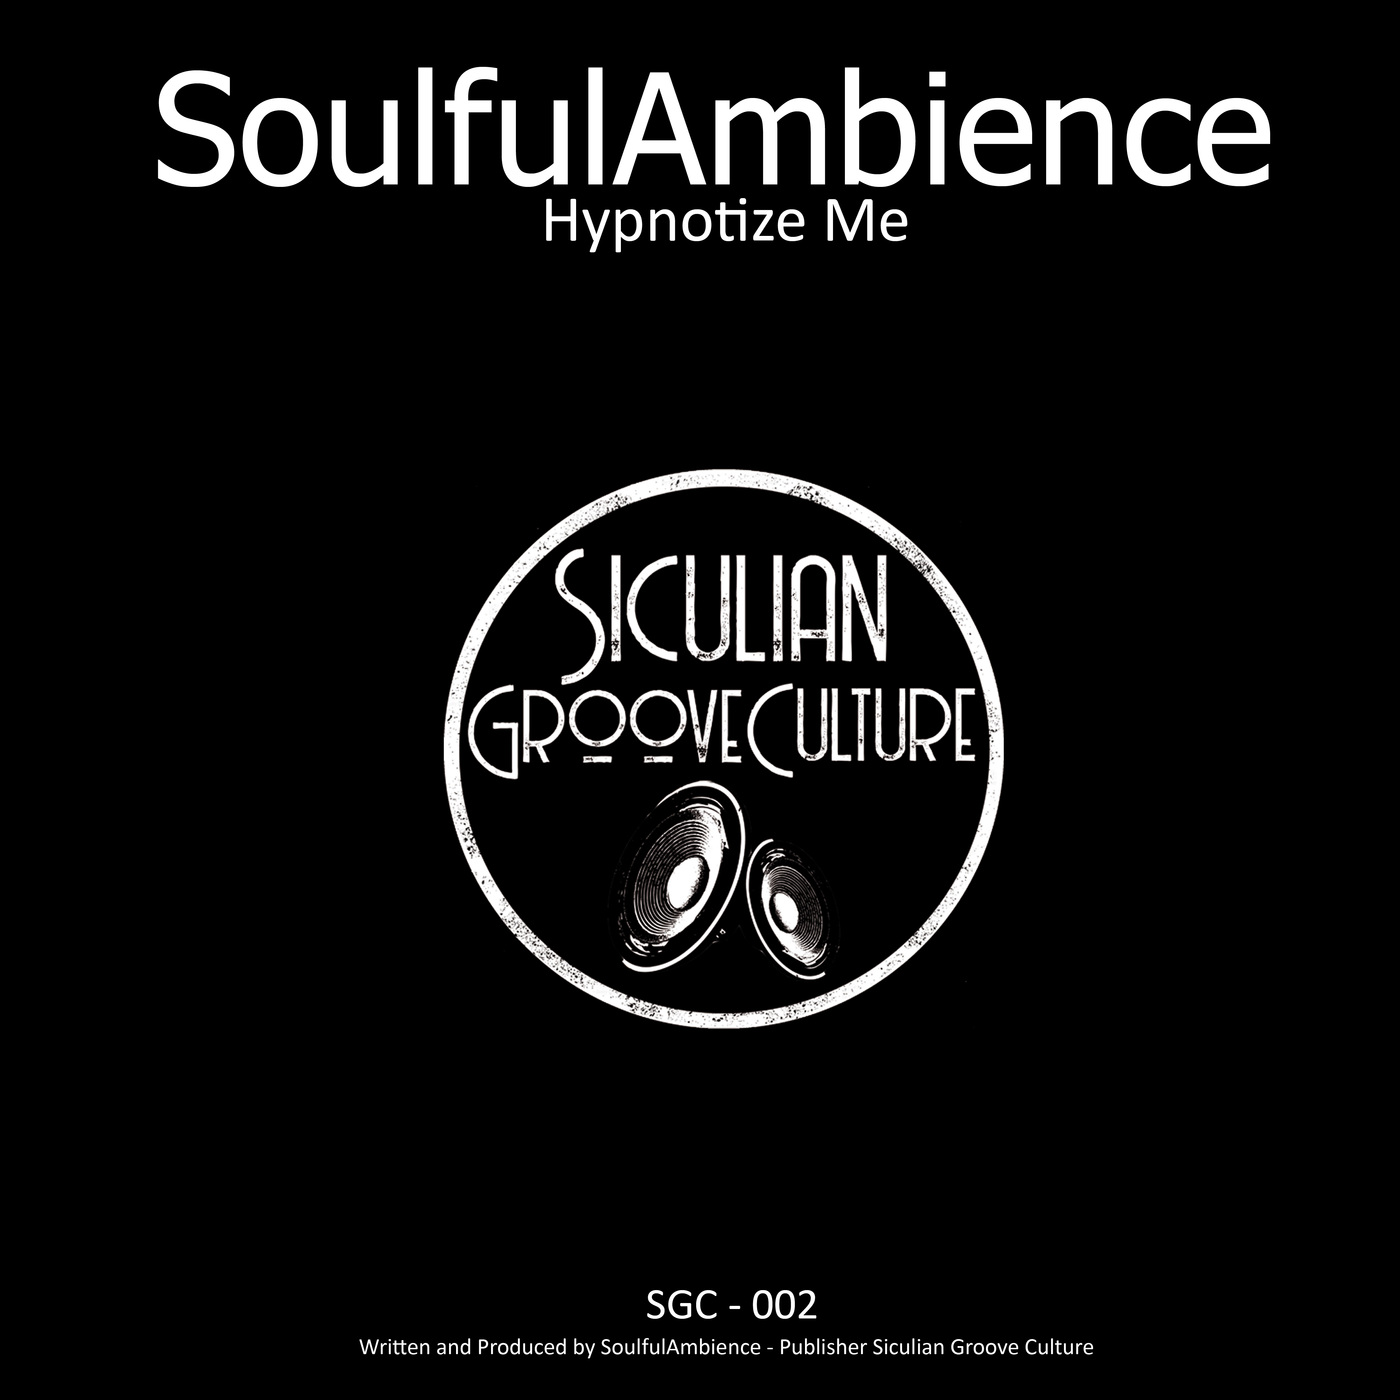 SoulfulAmbience - Hypnotize Me / SiculianGrooveCulture